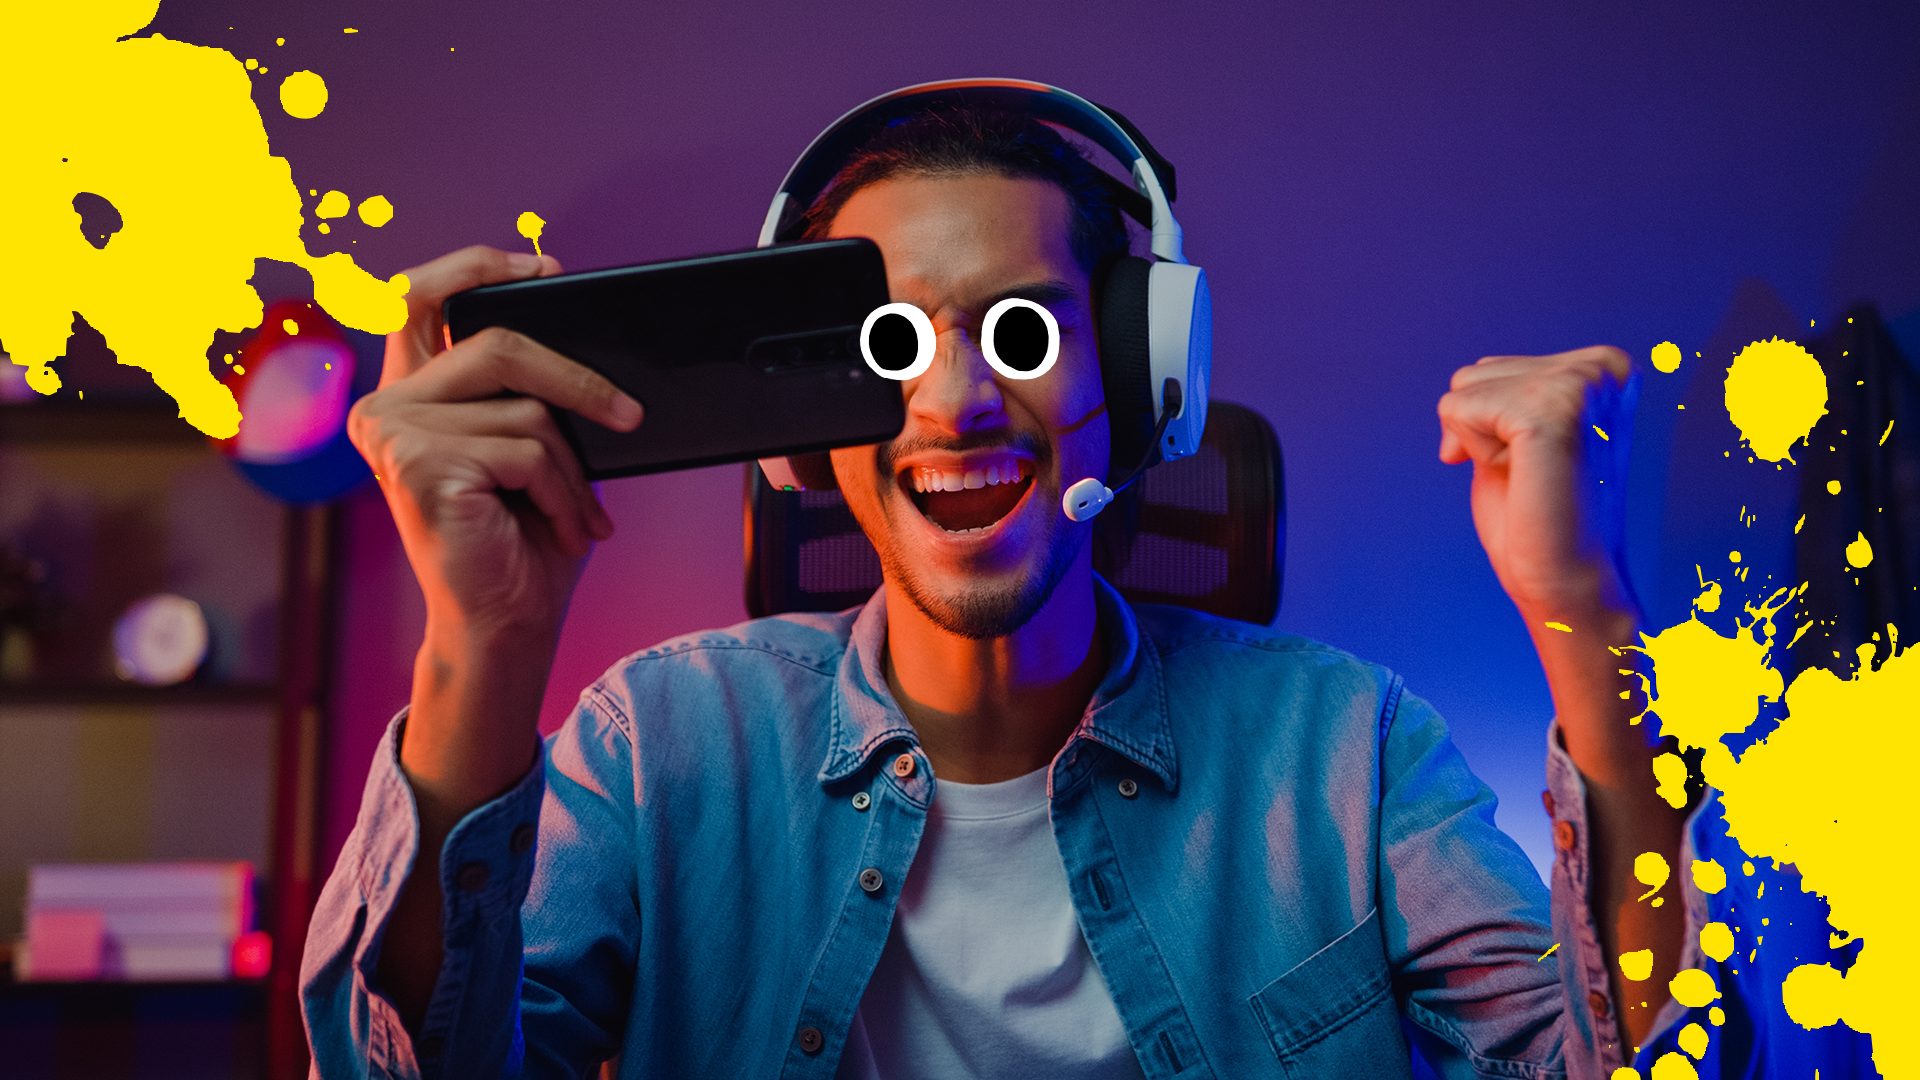 Gaming guy looking happy and splats